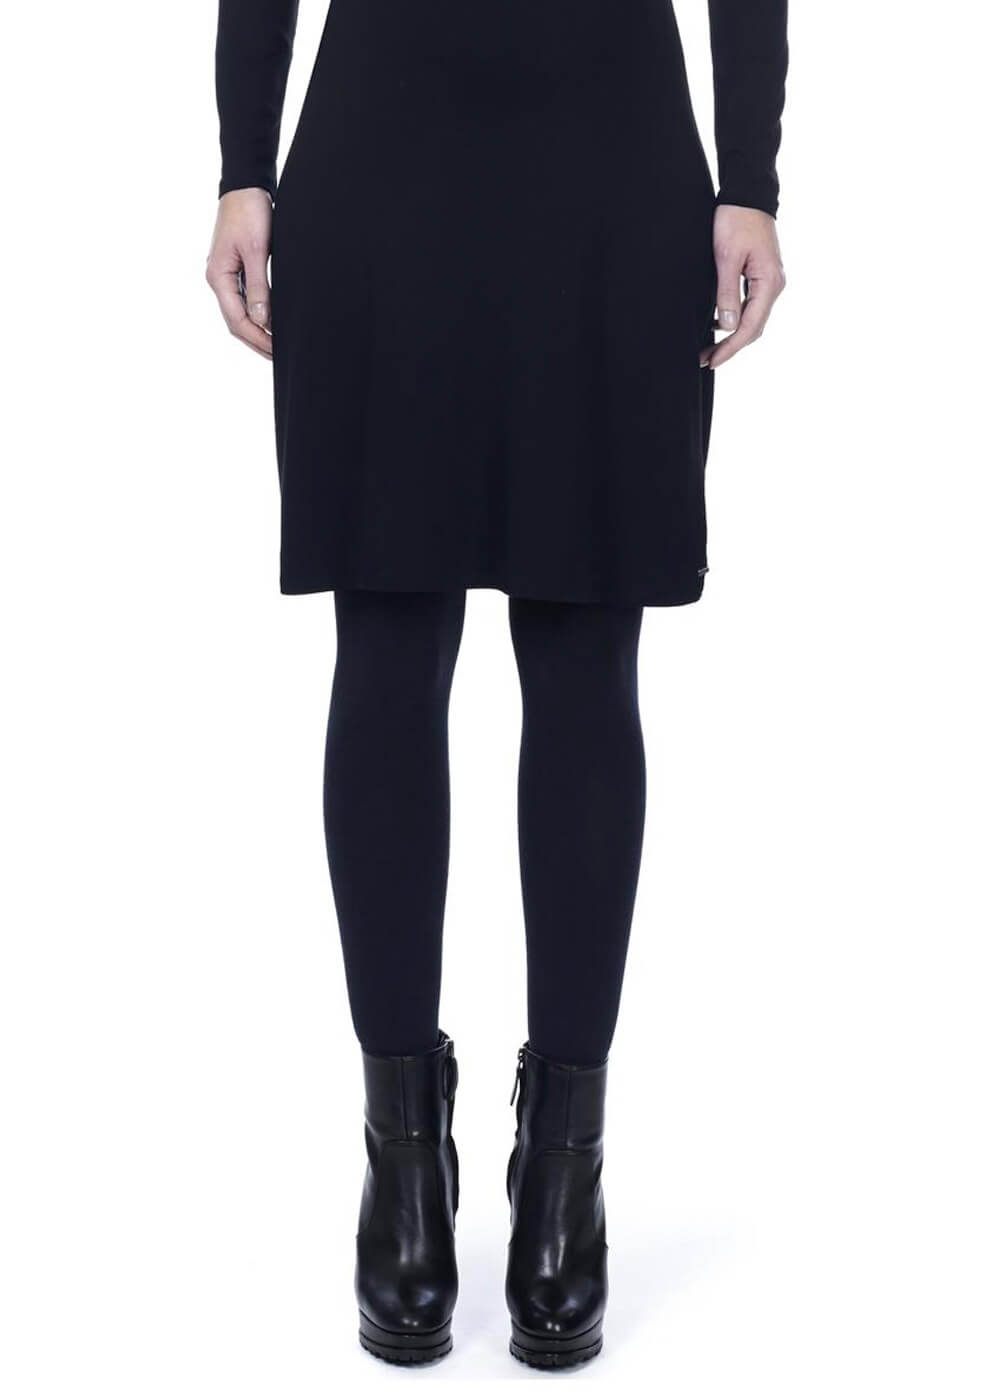 Winter Knit Maternity Tights in Black by Noppies